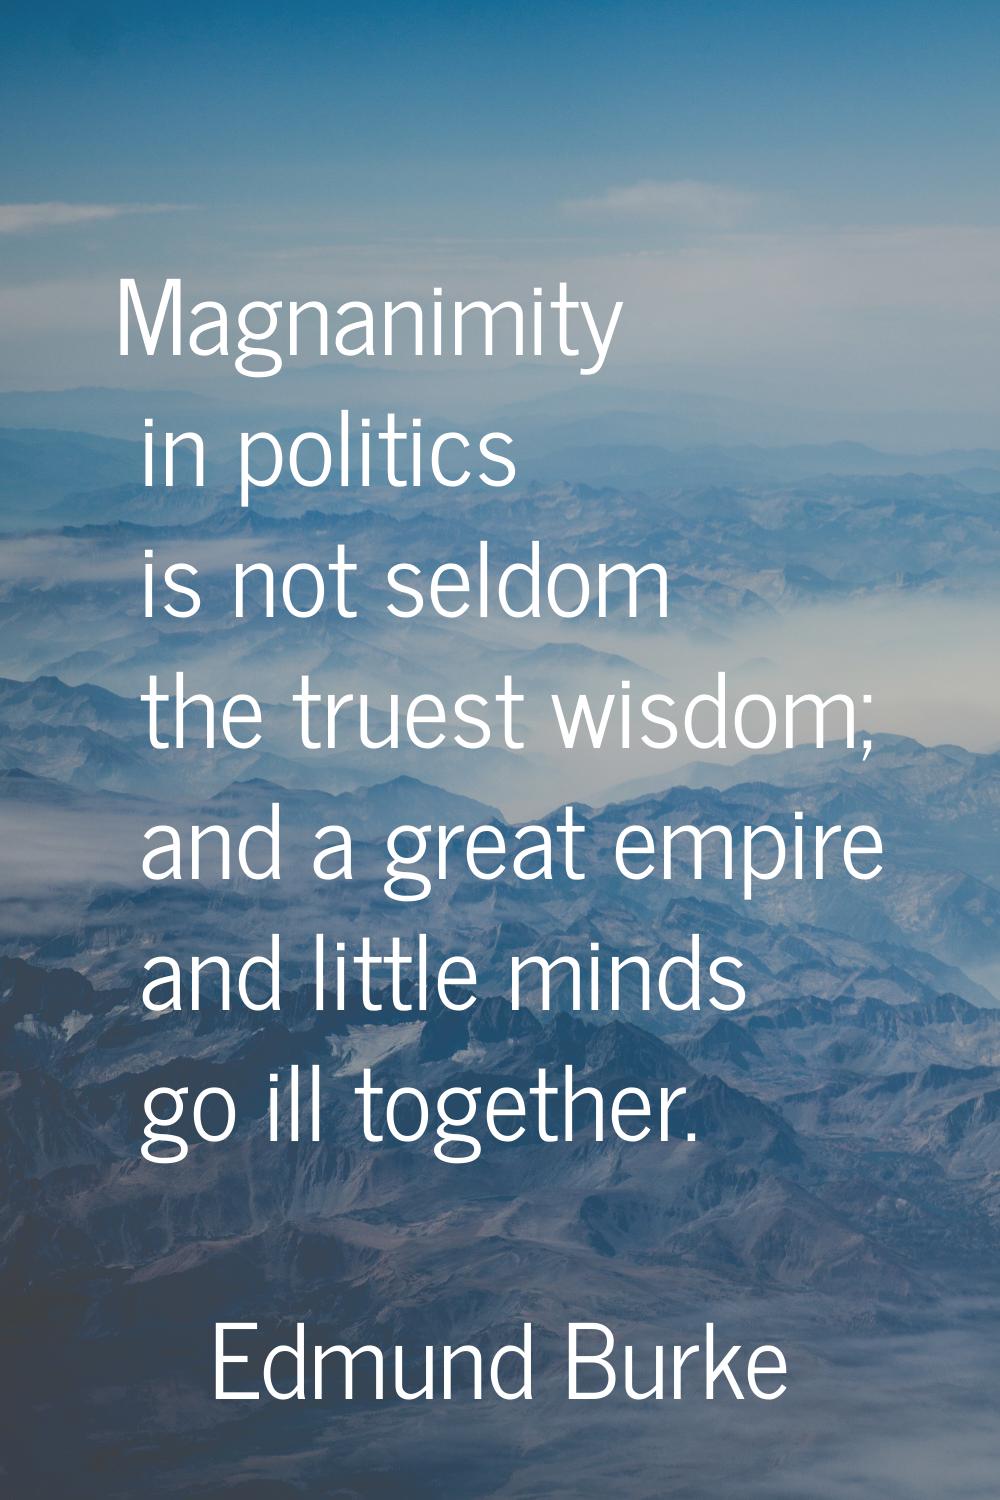 Magnanimity in politics is not seldom the truest wisdom; and a great empire and little minds go ill